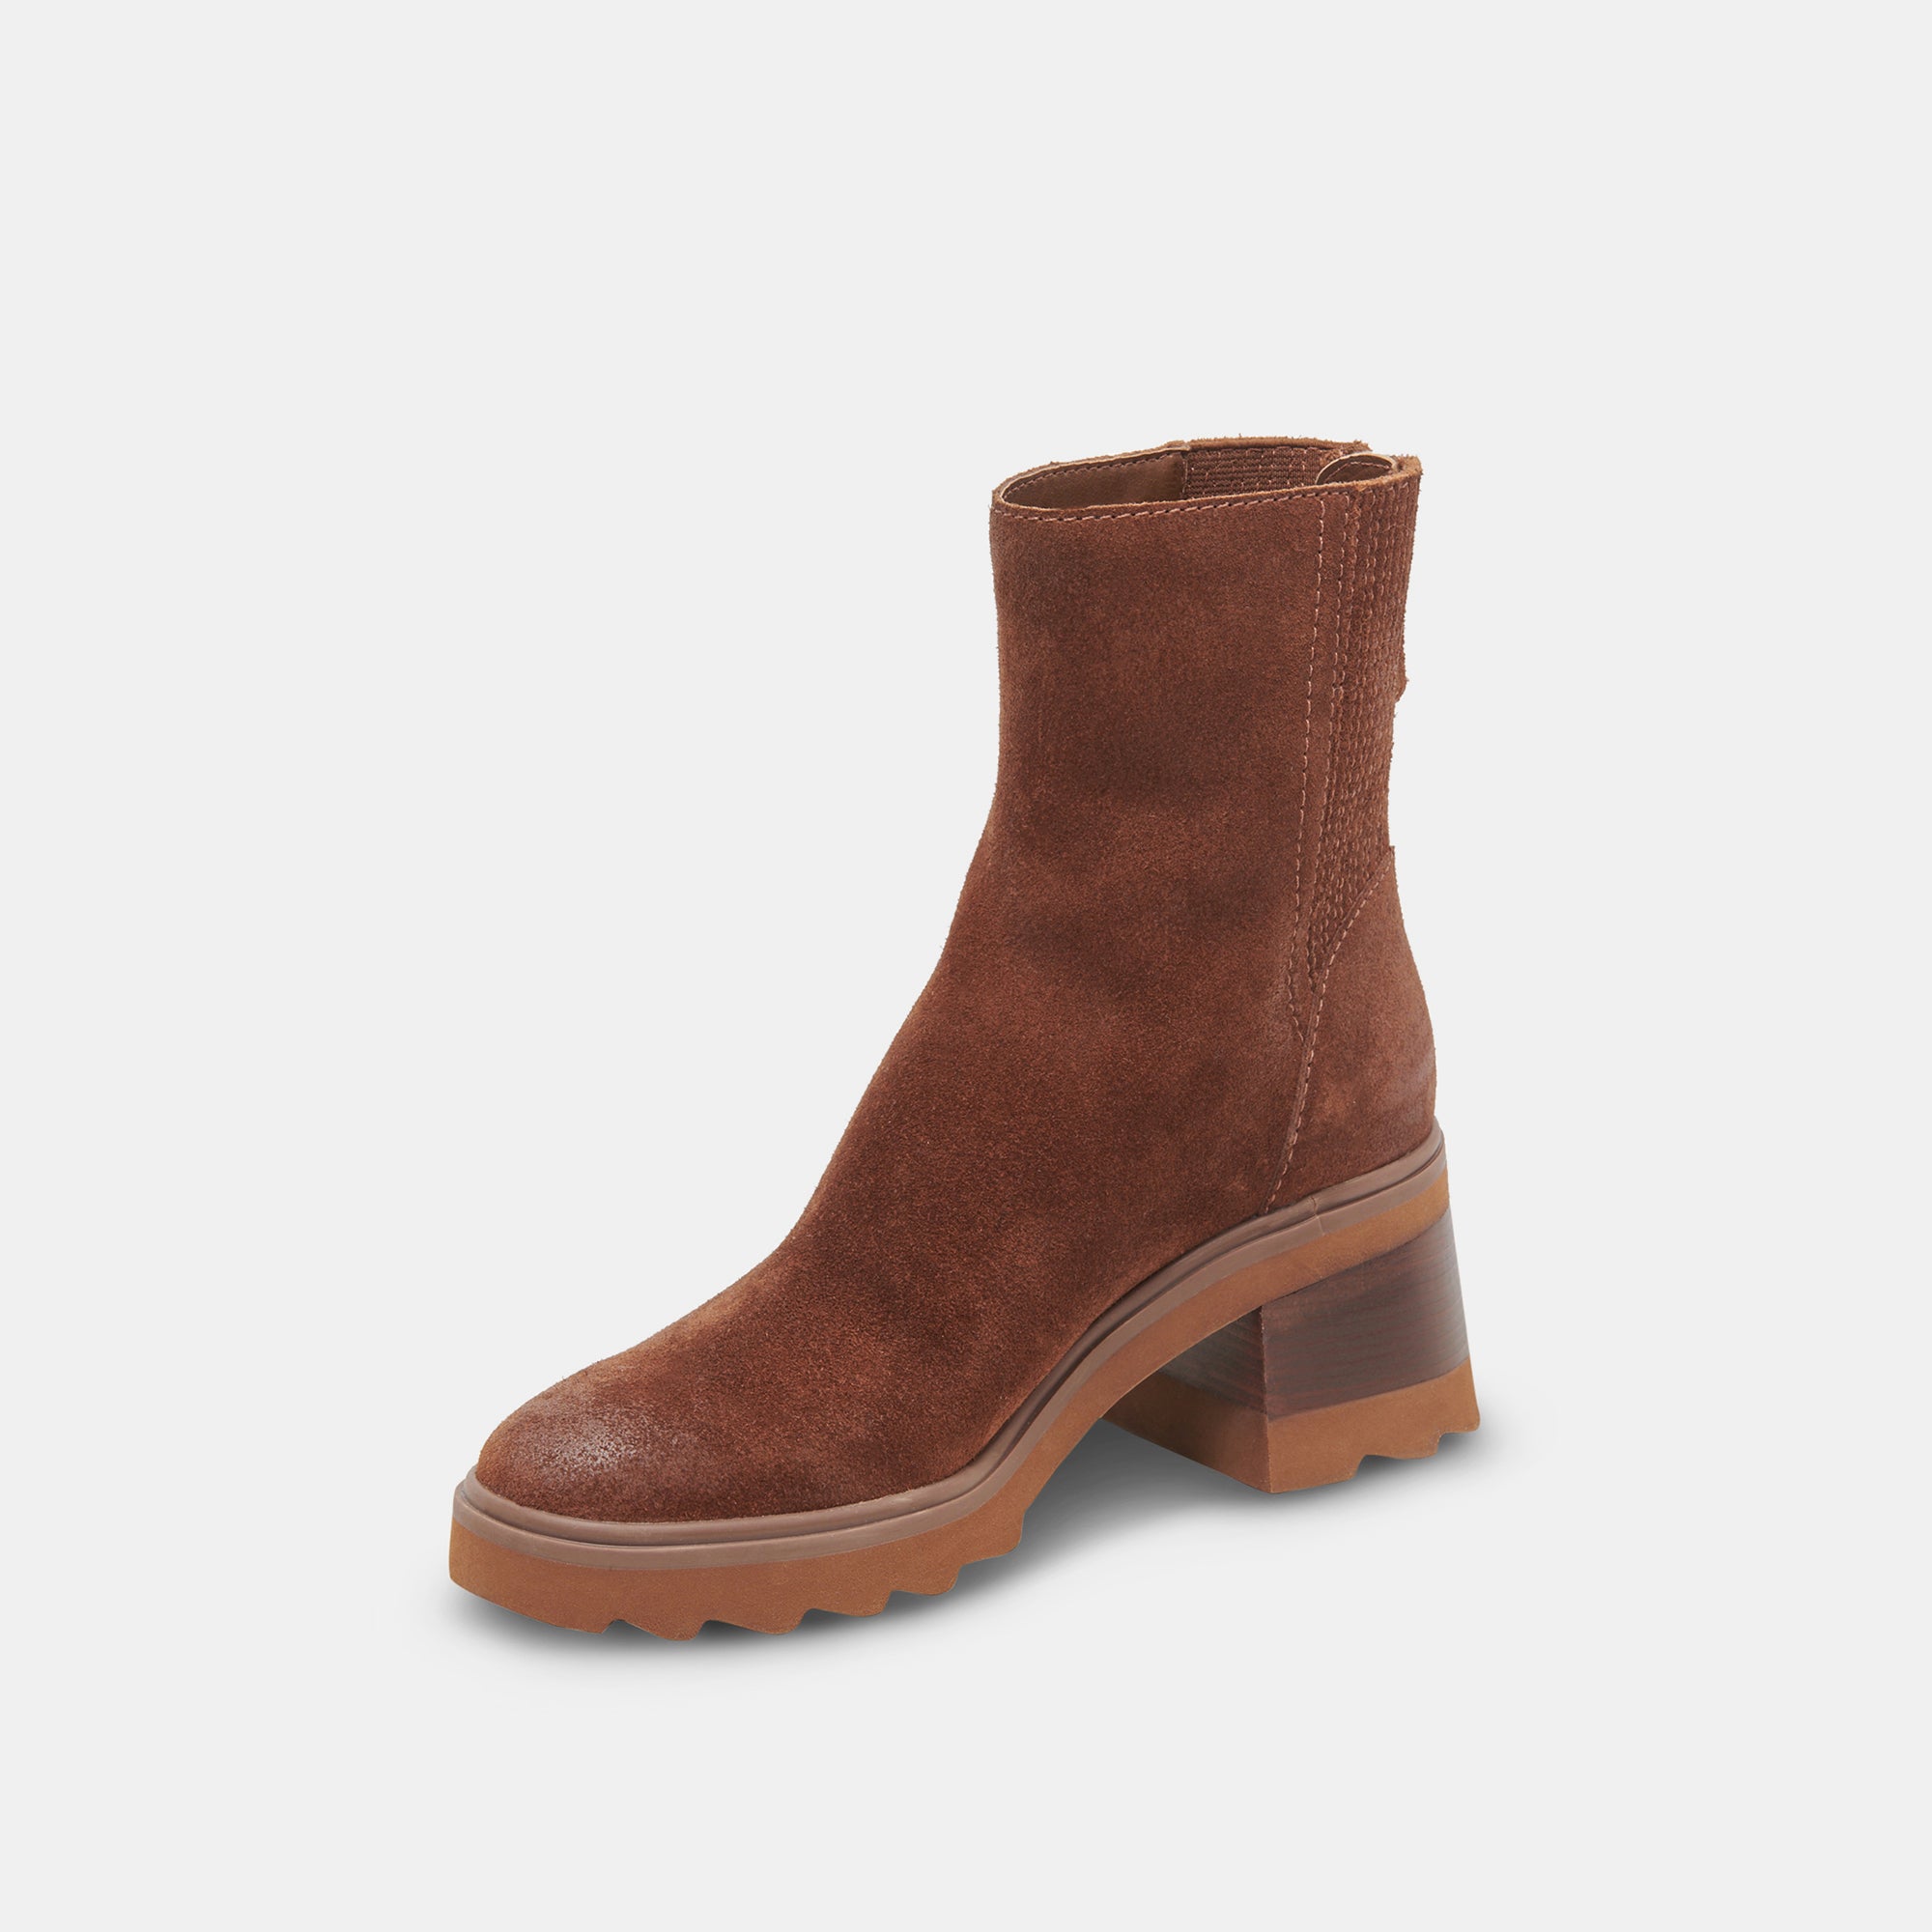 MARTY H2O Wide Boots Cocoa Suede | Women's Waterproof Suede Boots